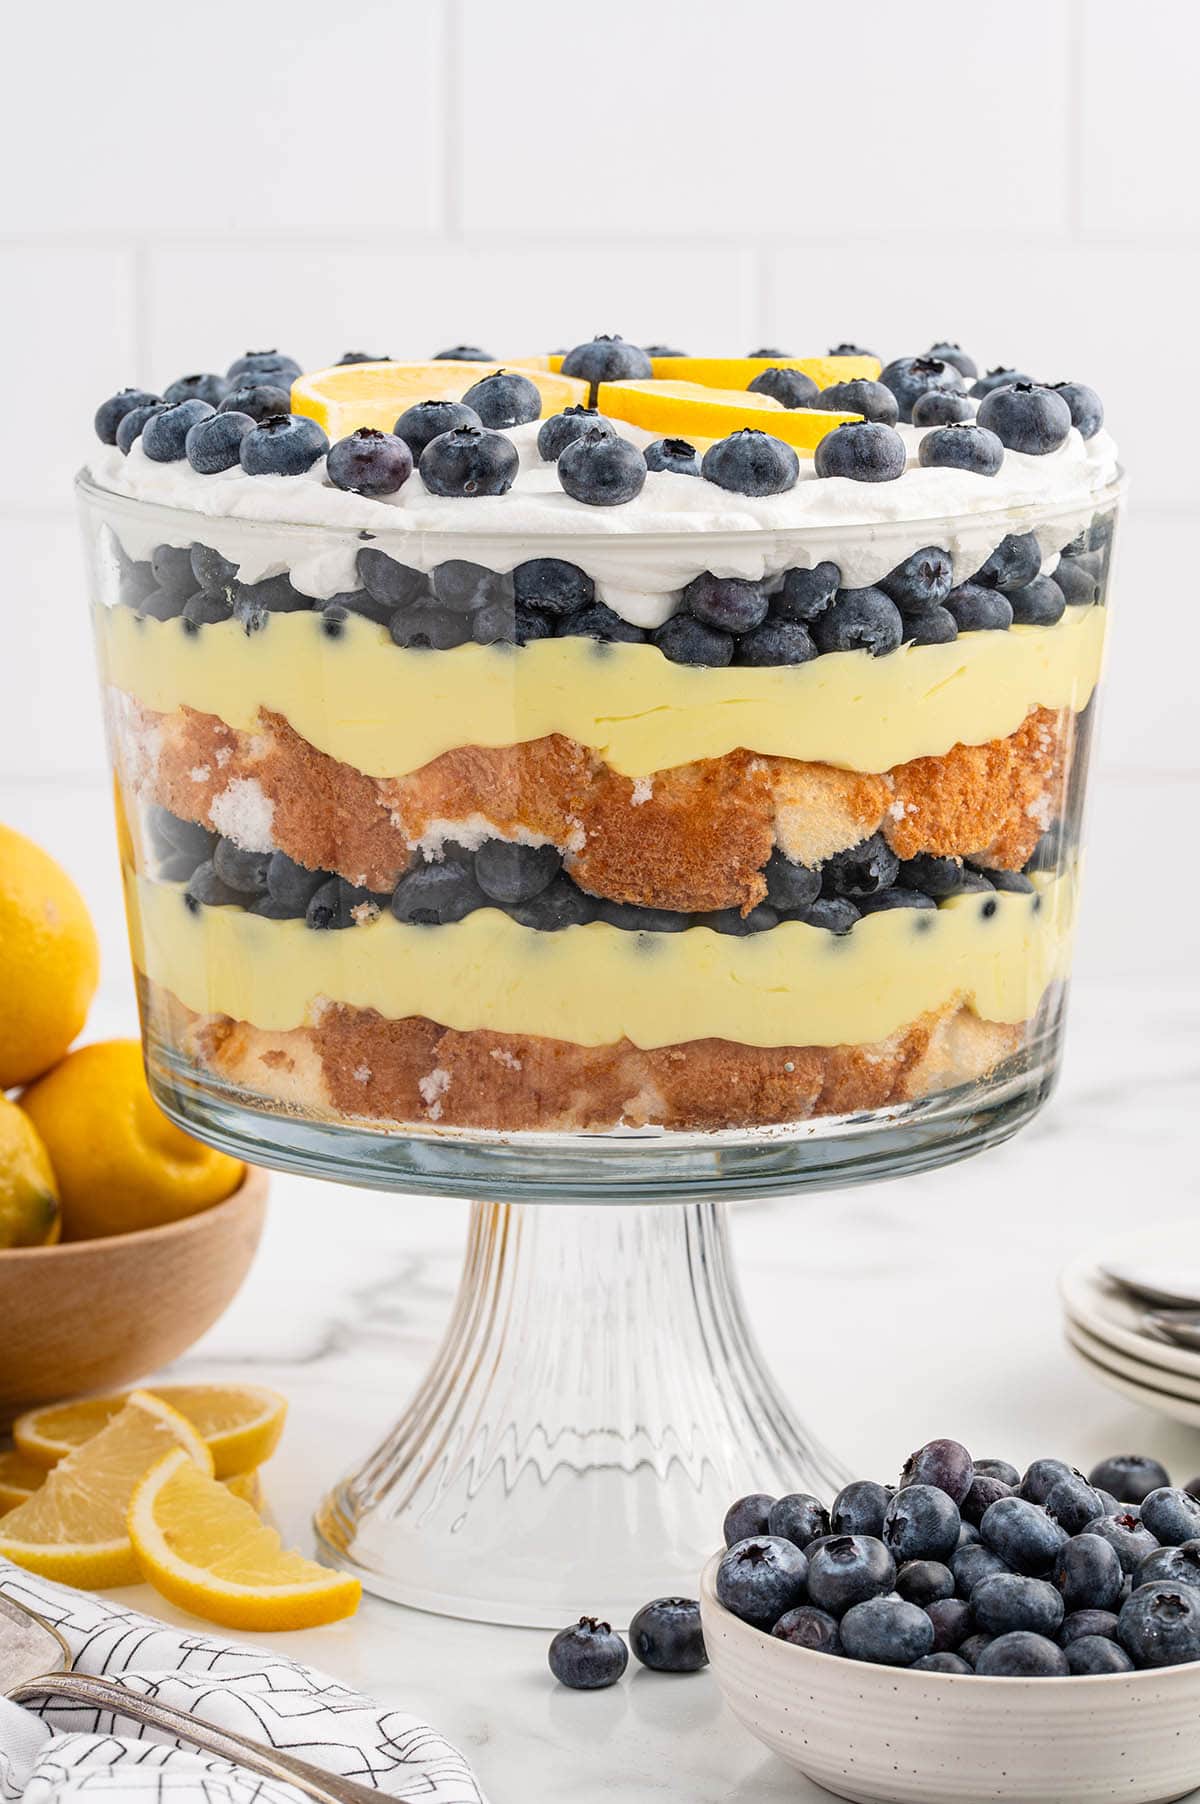 Lemon Blueberry Trifle with a couple of blueberries in the bowl on the side.